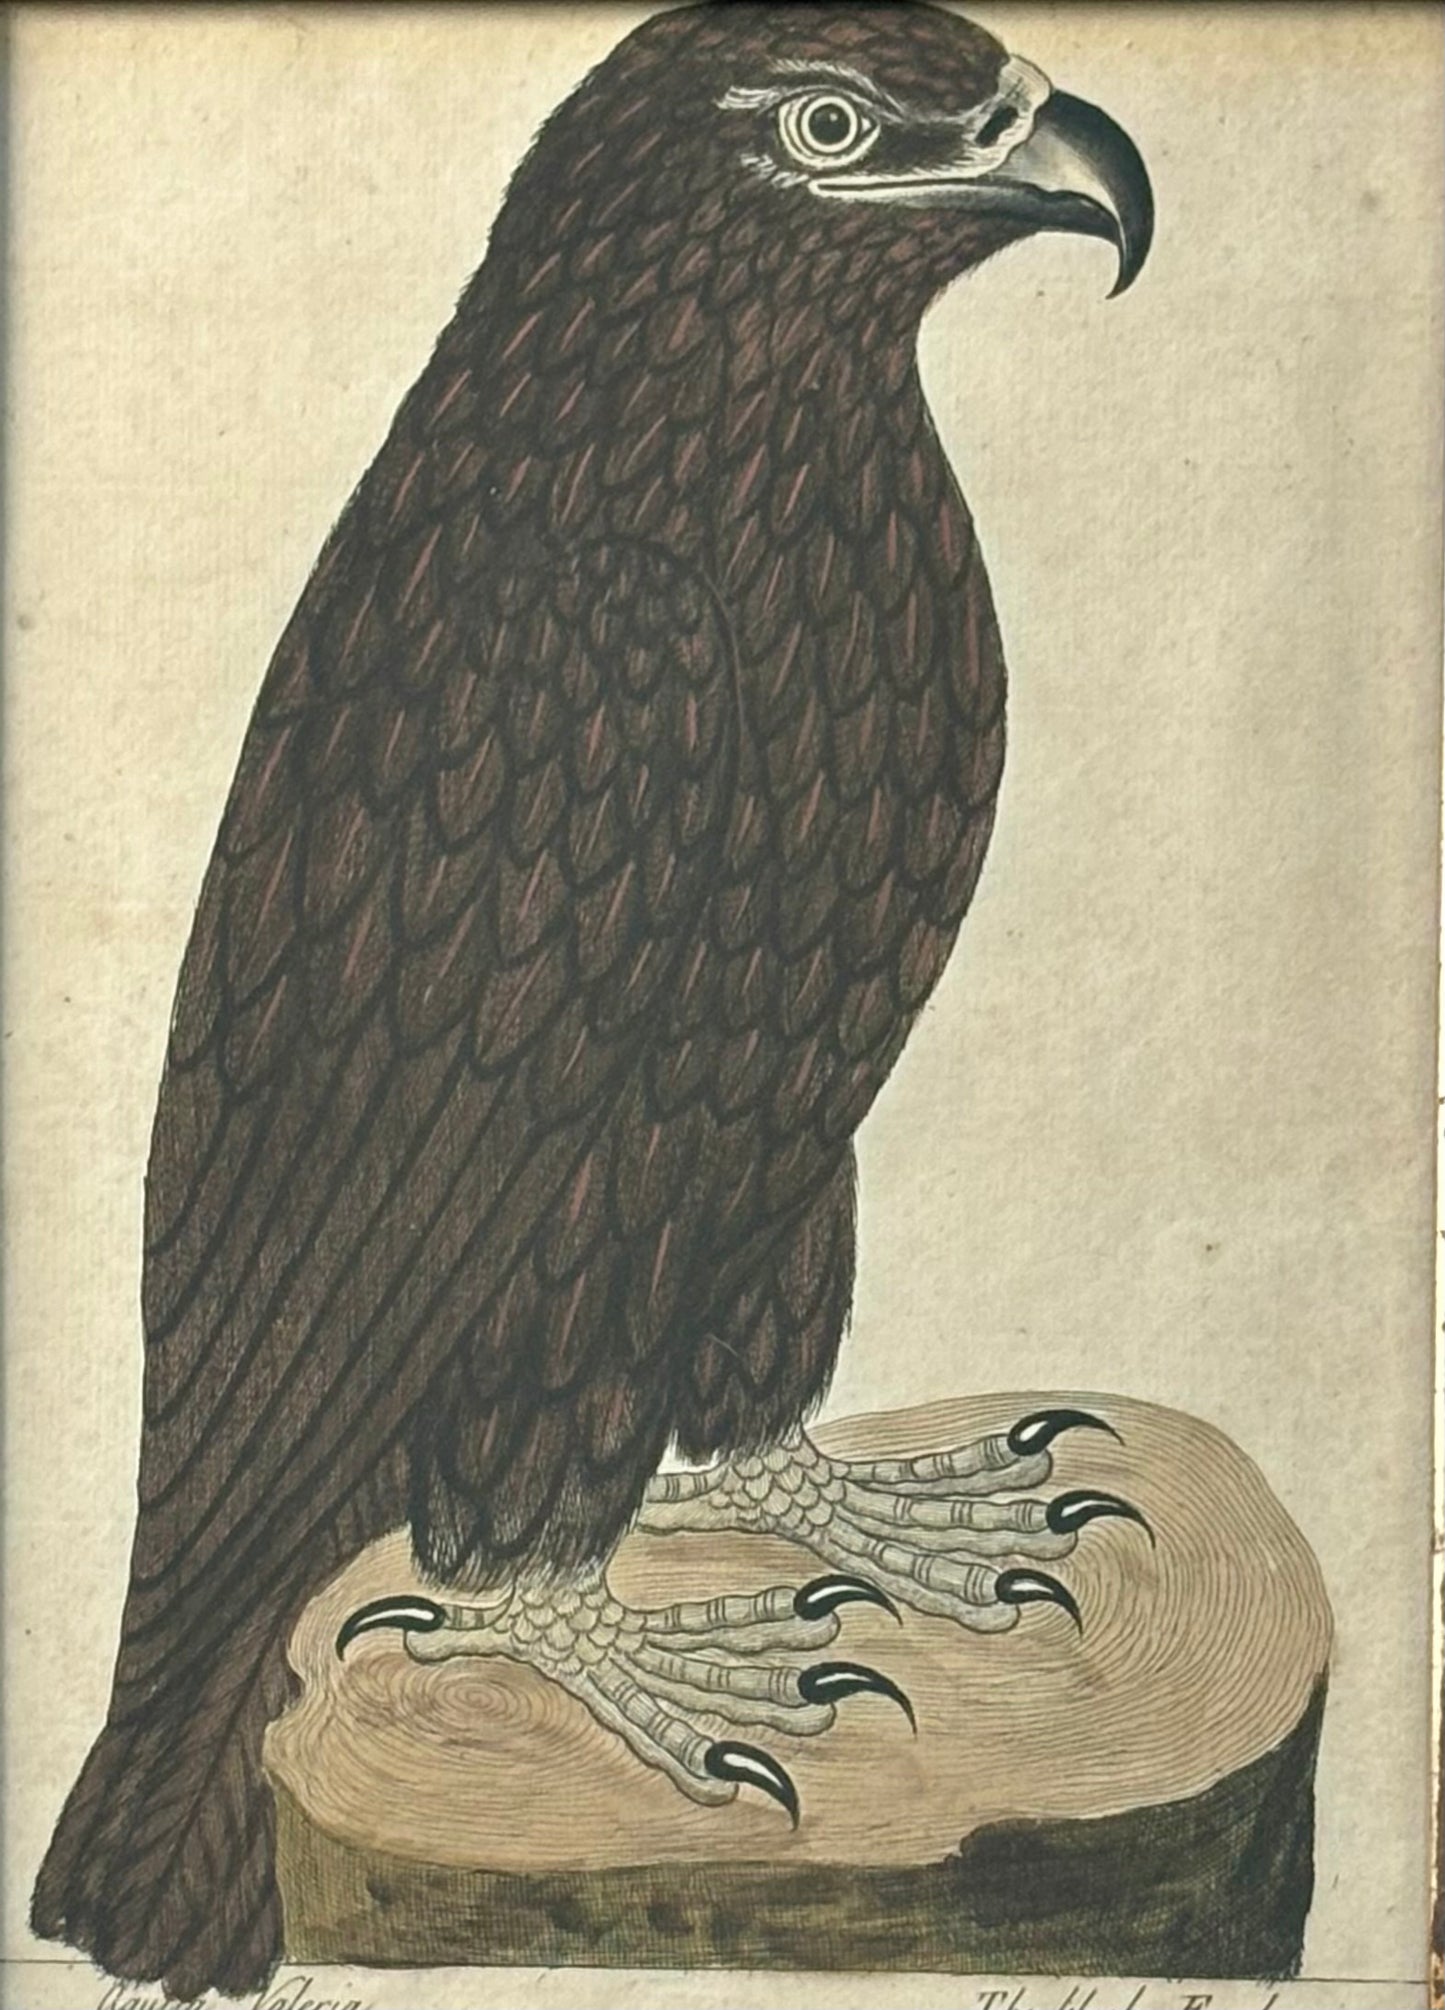 18th Century American Engraving of a Black Eagle